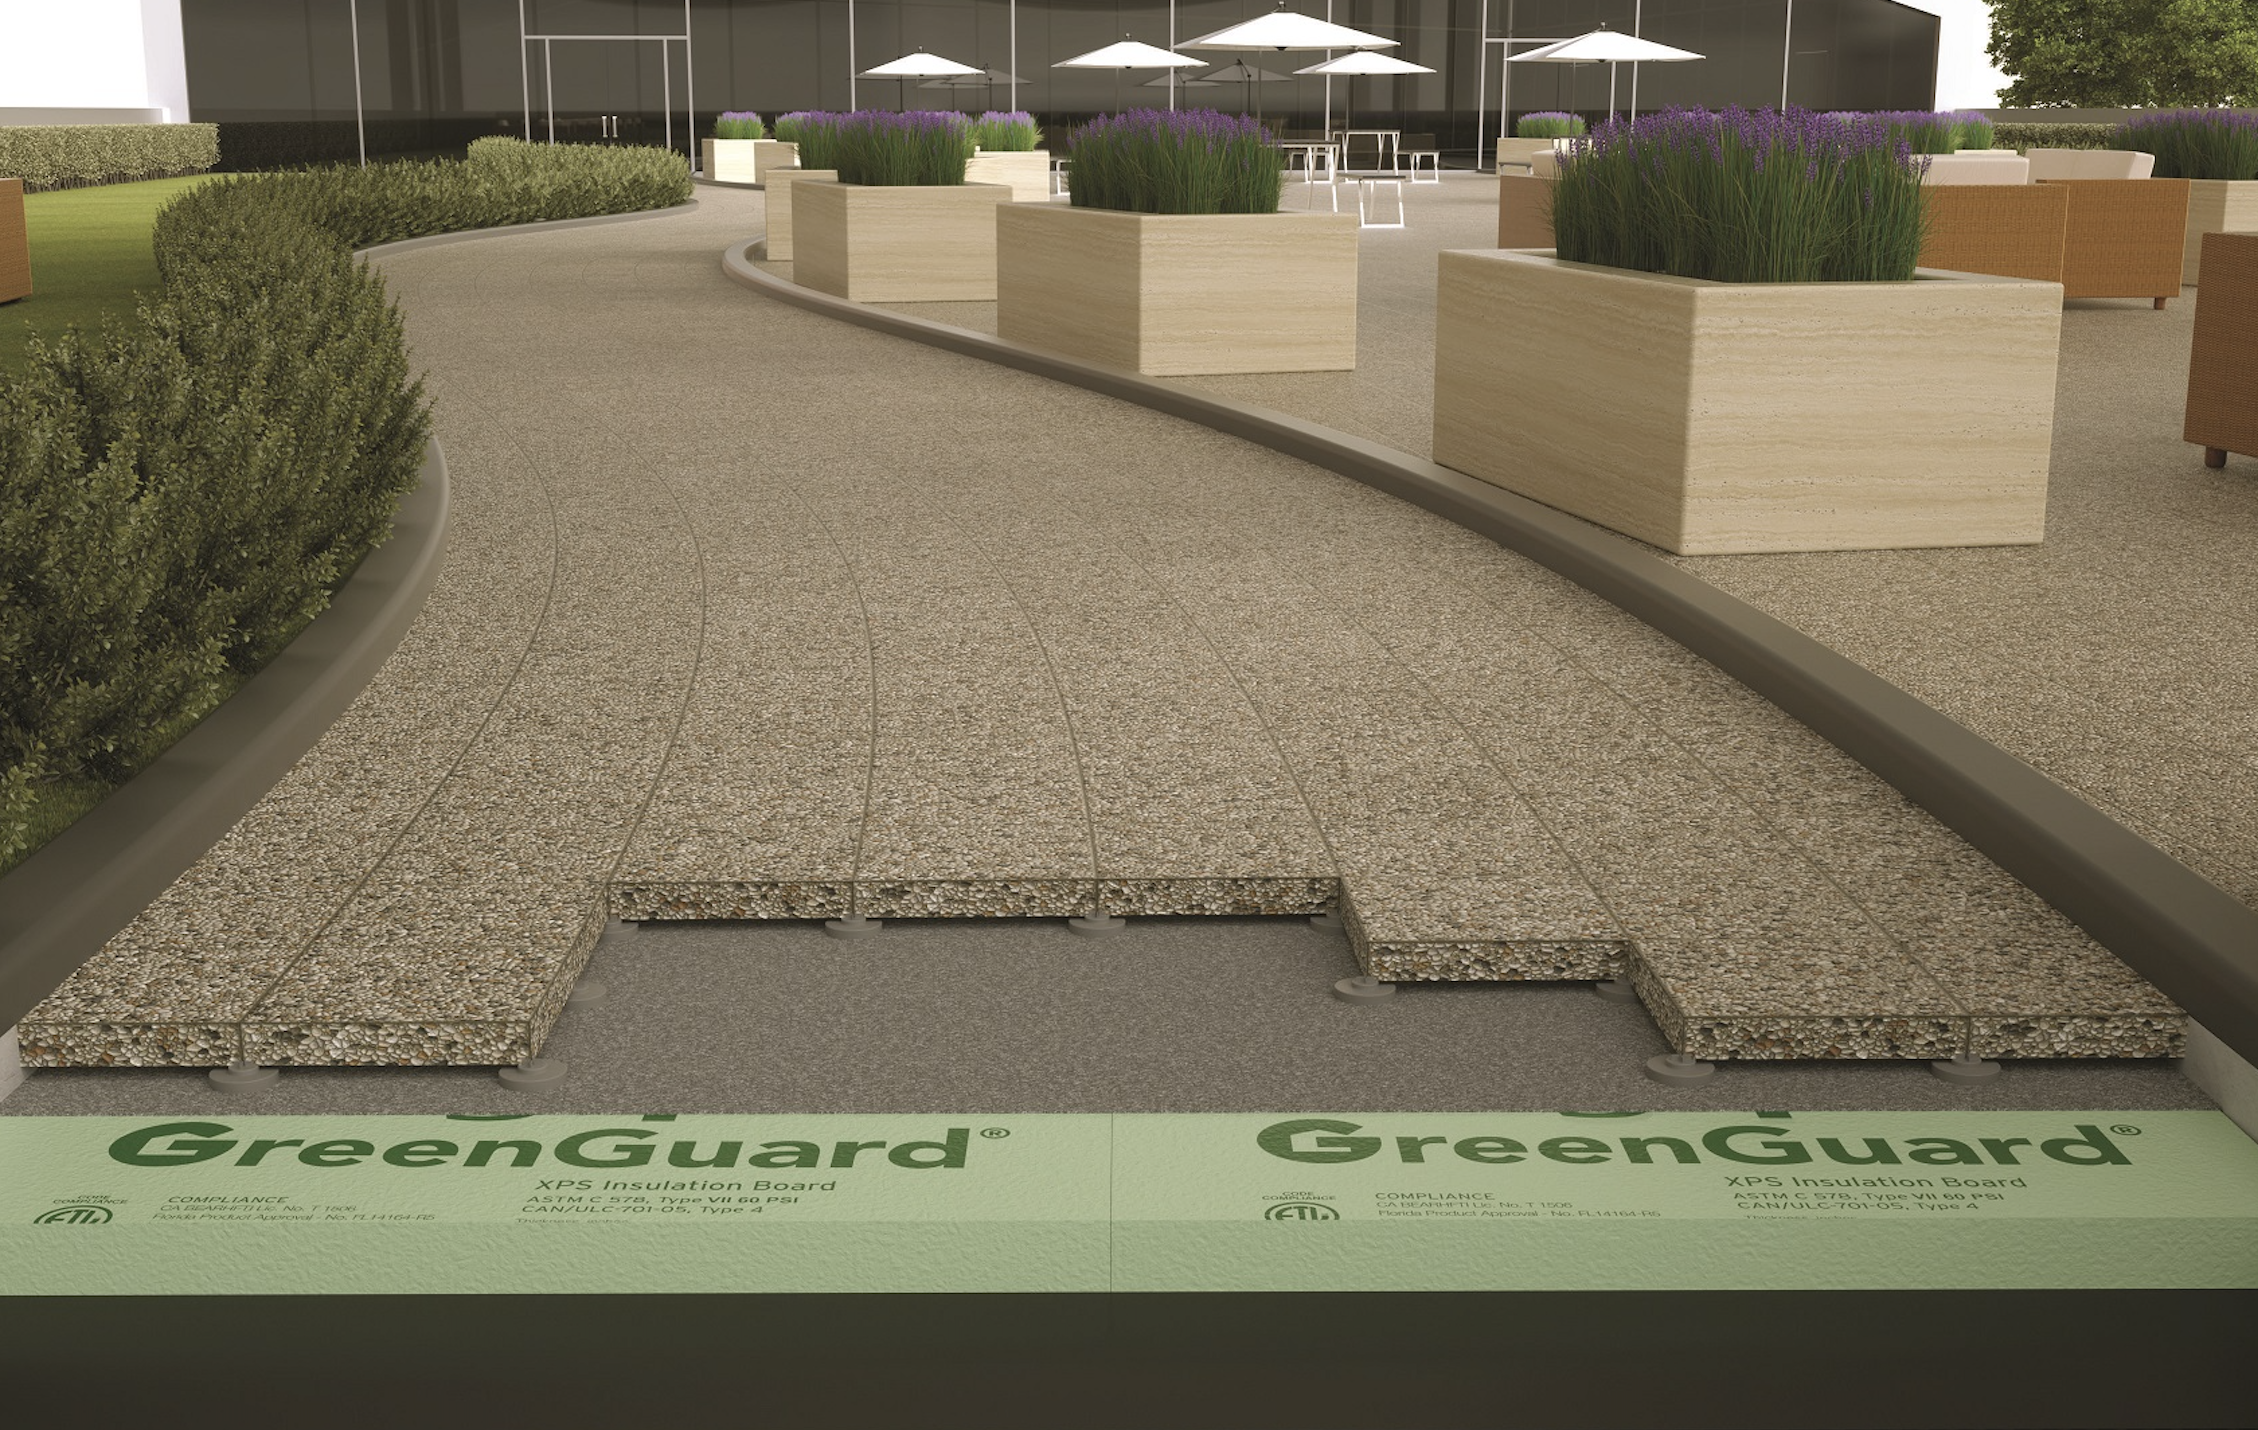 Kingspan Insulation has expanded its commercial product offering by introducing GreenGuard Type VII XPS Insulation Board, which is designed for high load-bearing engineered applications.